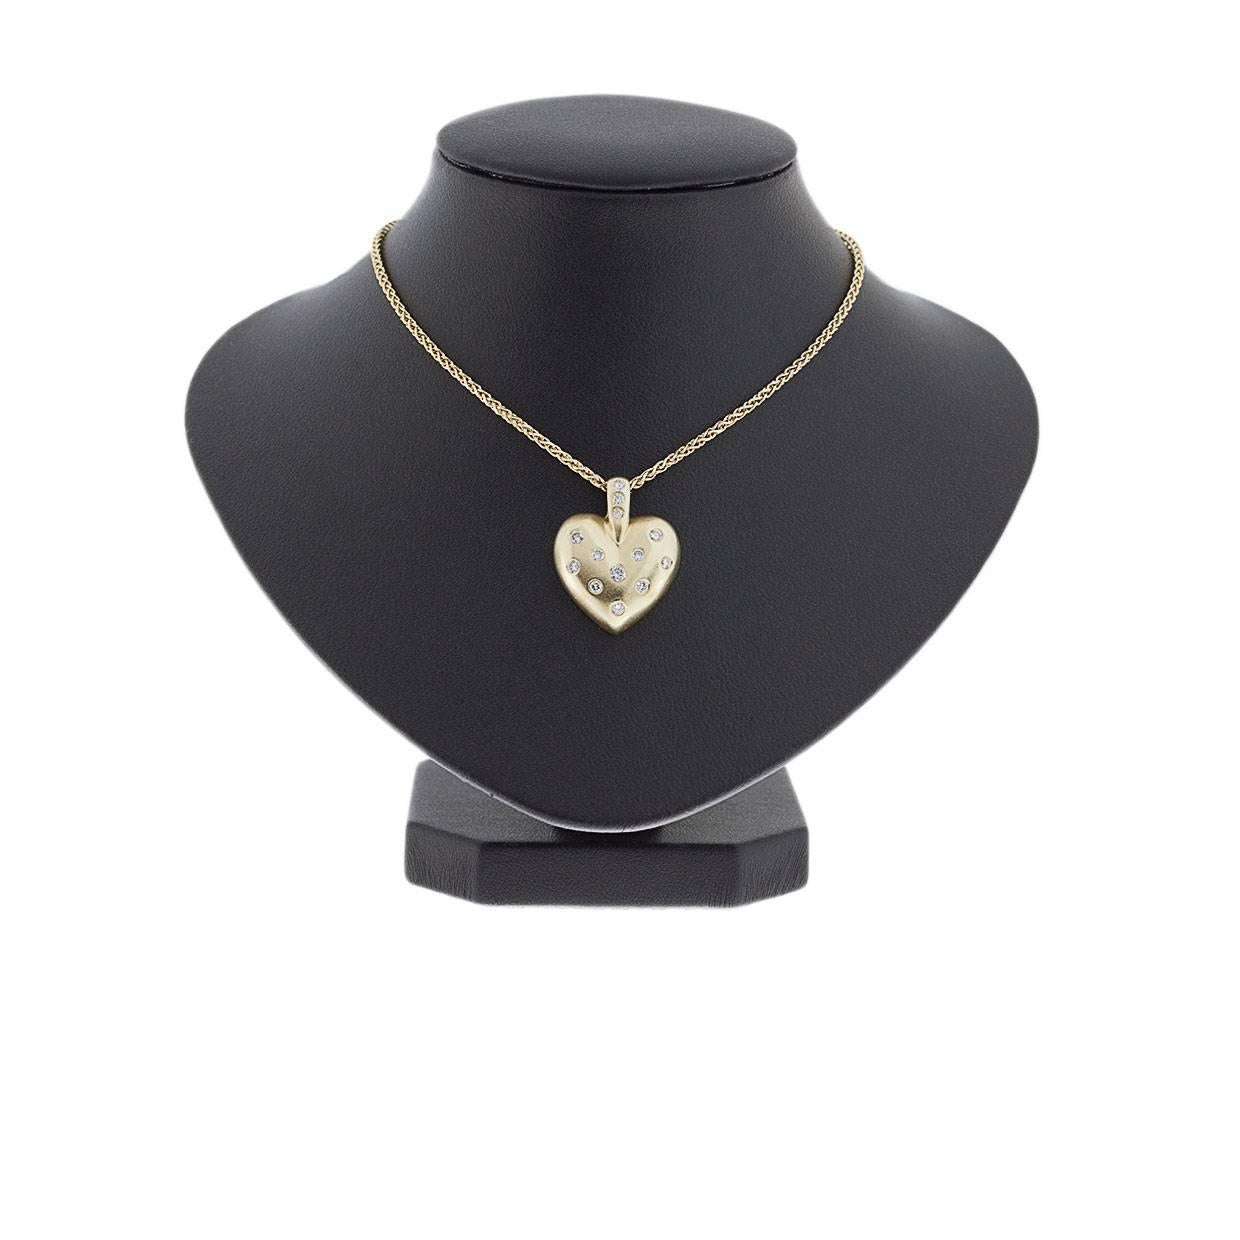 This lovely pendant gives a classic, elegant look with its understated sparkle. It features 13 round brilliant cut diamonds that have a combined total weight of .40 carat. These sparkly & beautiful diamonds are flush set in a 14 karat yellow gold,